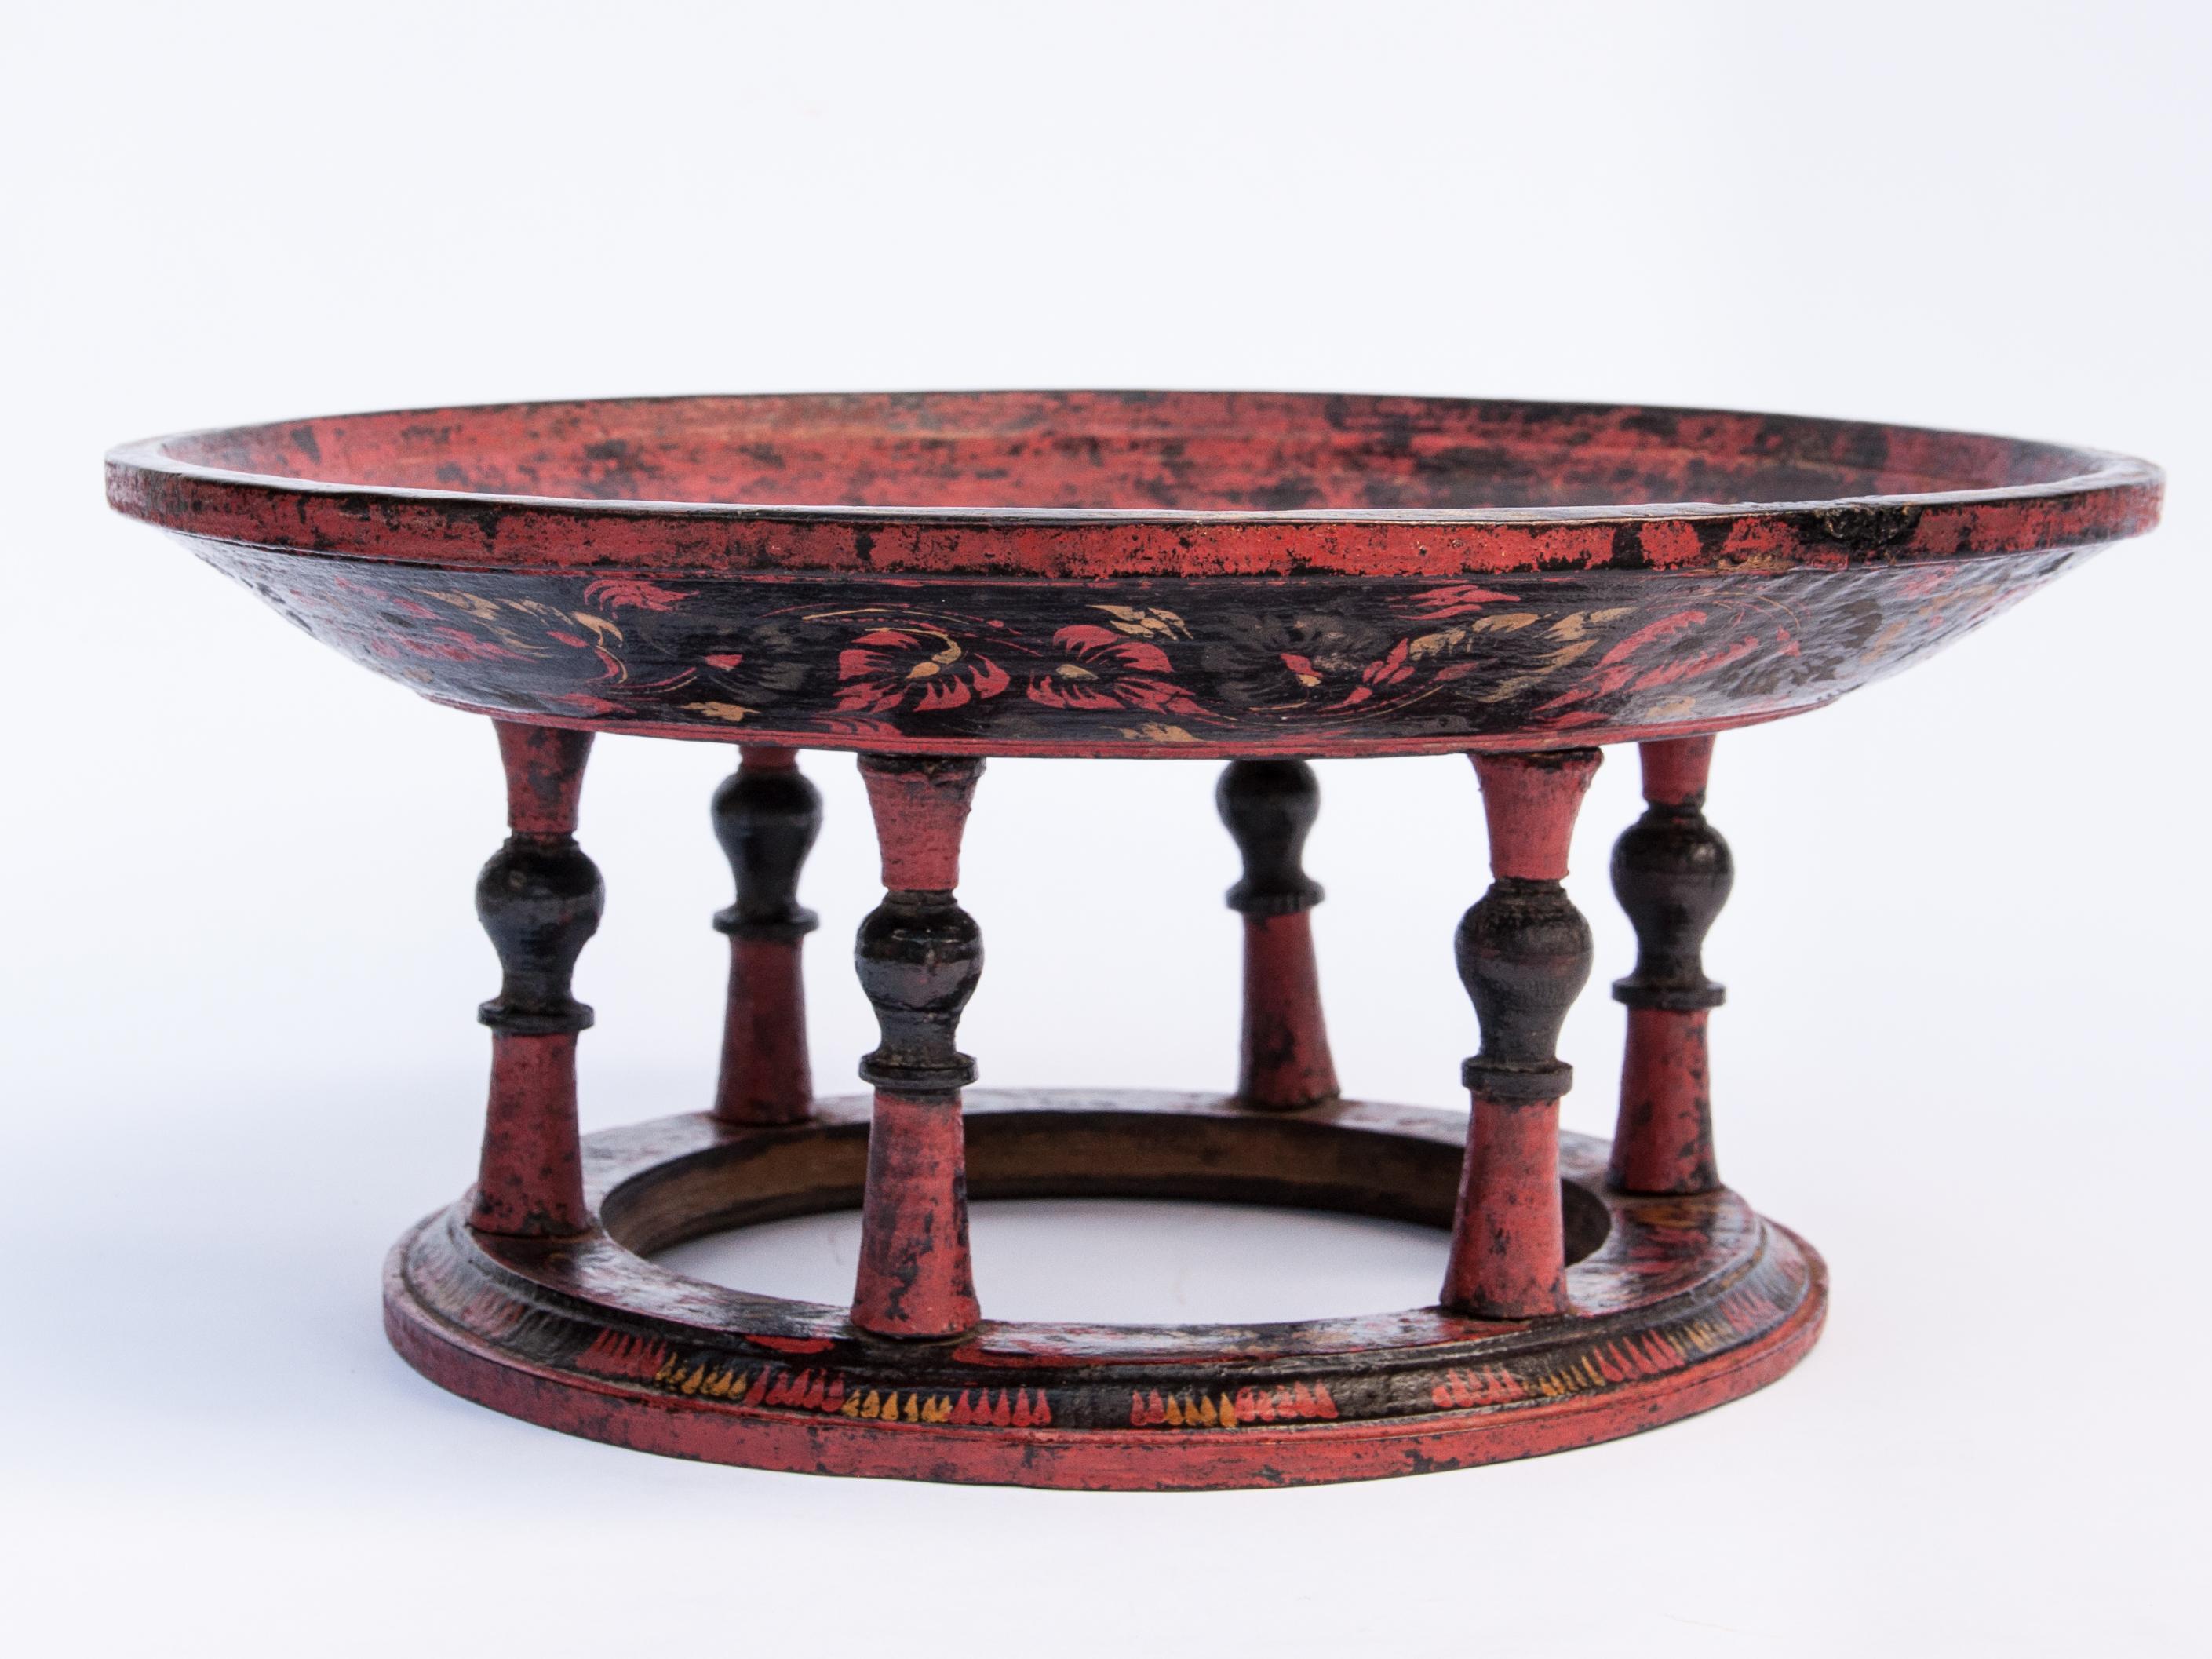 Vintage painted lacquer teak wood tray on stand, Daung-lan. Shan of Burma. Early to Mid-20th century.
This red and black decorated tray comes from the Shan State of Eastern Burma, and was used to serve food; dishes were placed on the tray to be